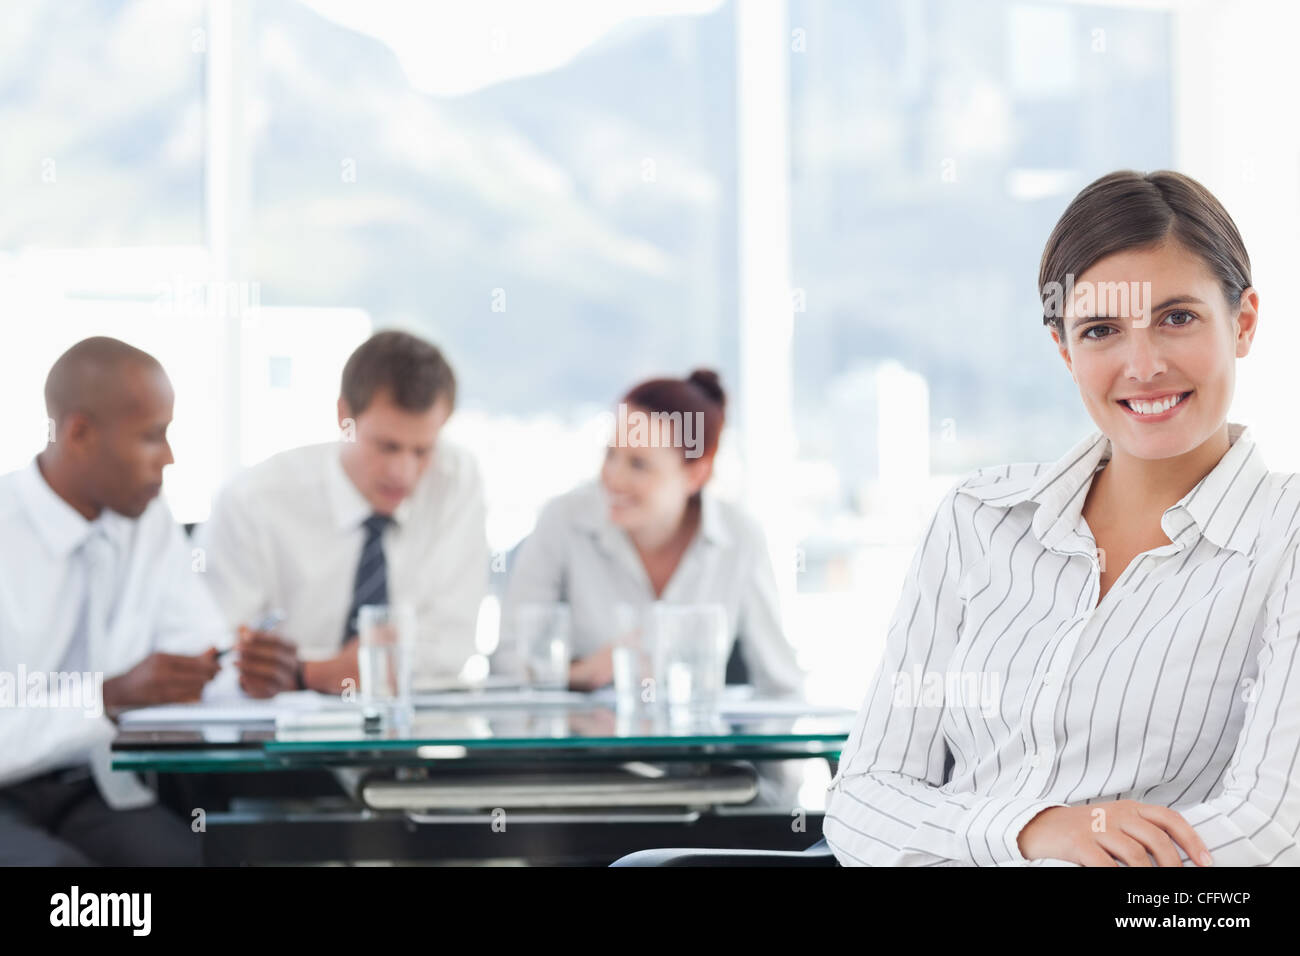 Smiling businesswoman with colleagues behind her holding a meeting Stock Photo